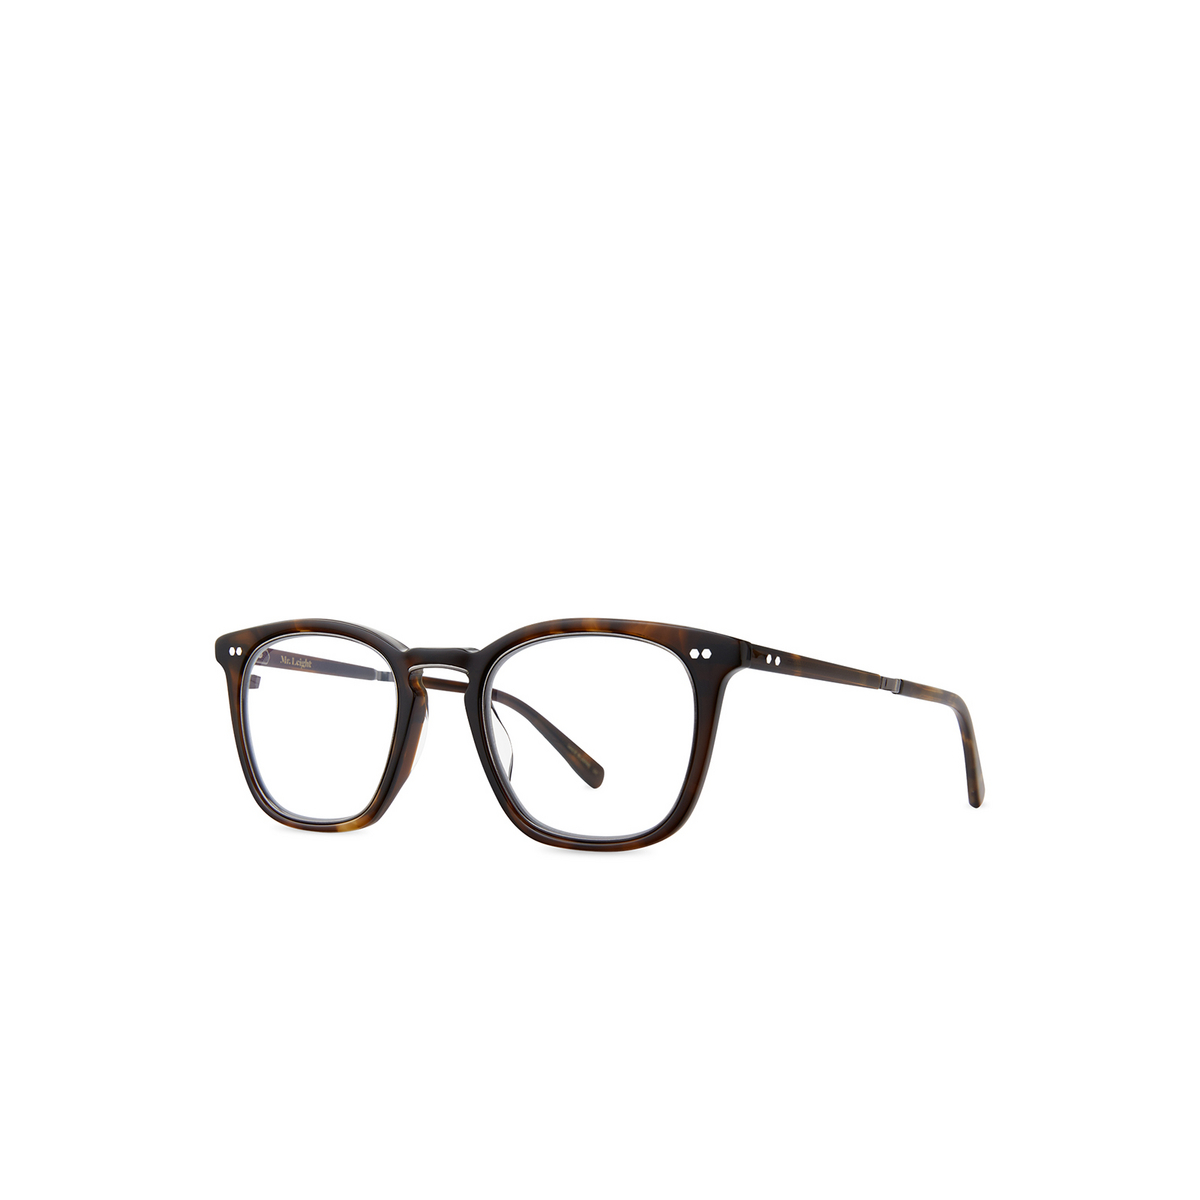 Mr. Leight GETTY II C Eyeglasses CACT-PW Cacao Tortoise-Pewter - three-quarters view